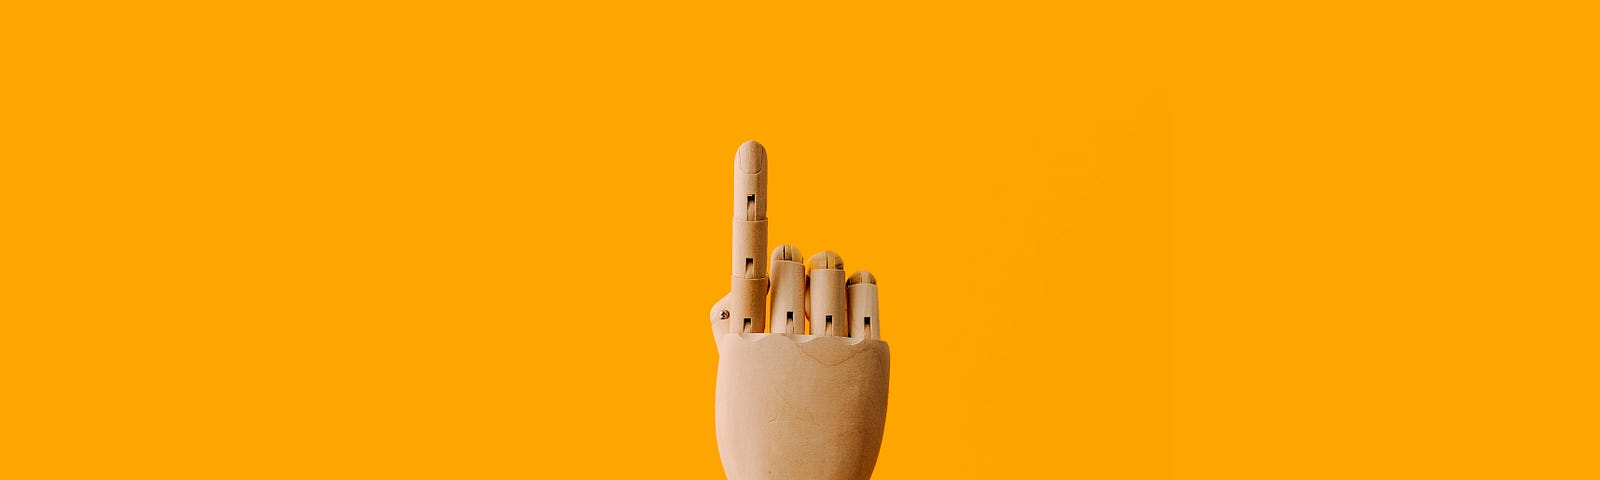 Image shows a wooden hand with the index finger pointed upward